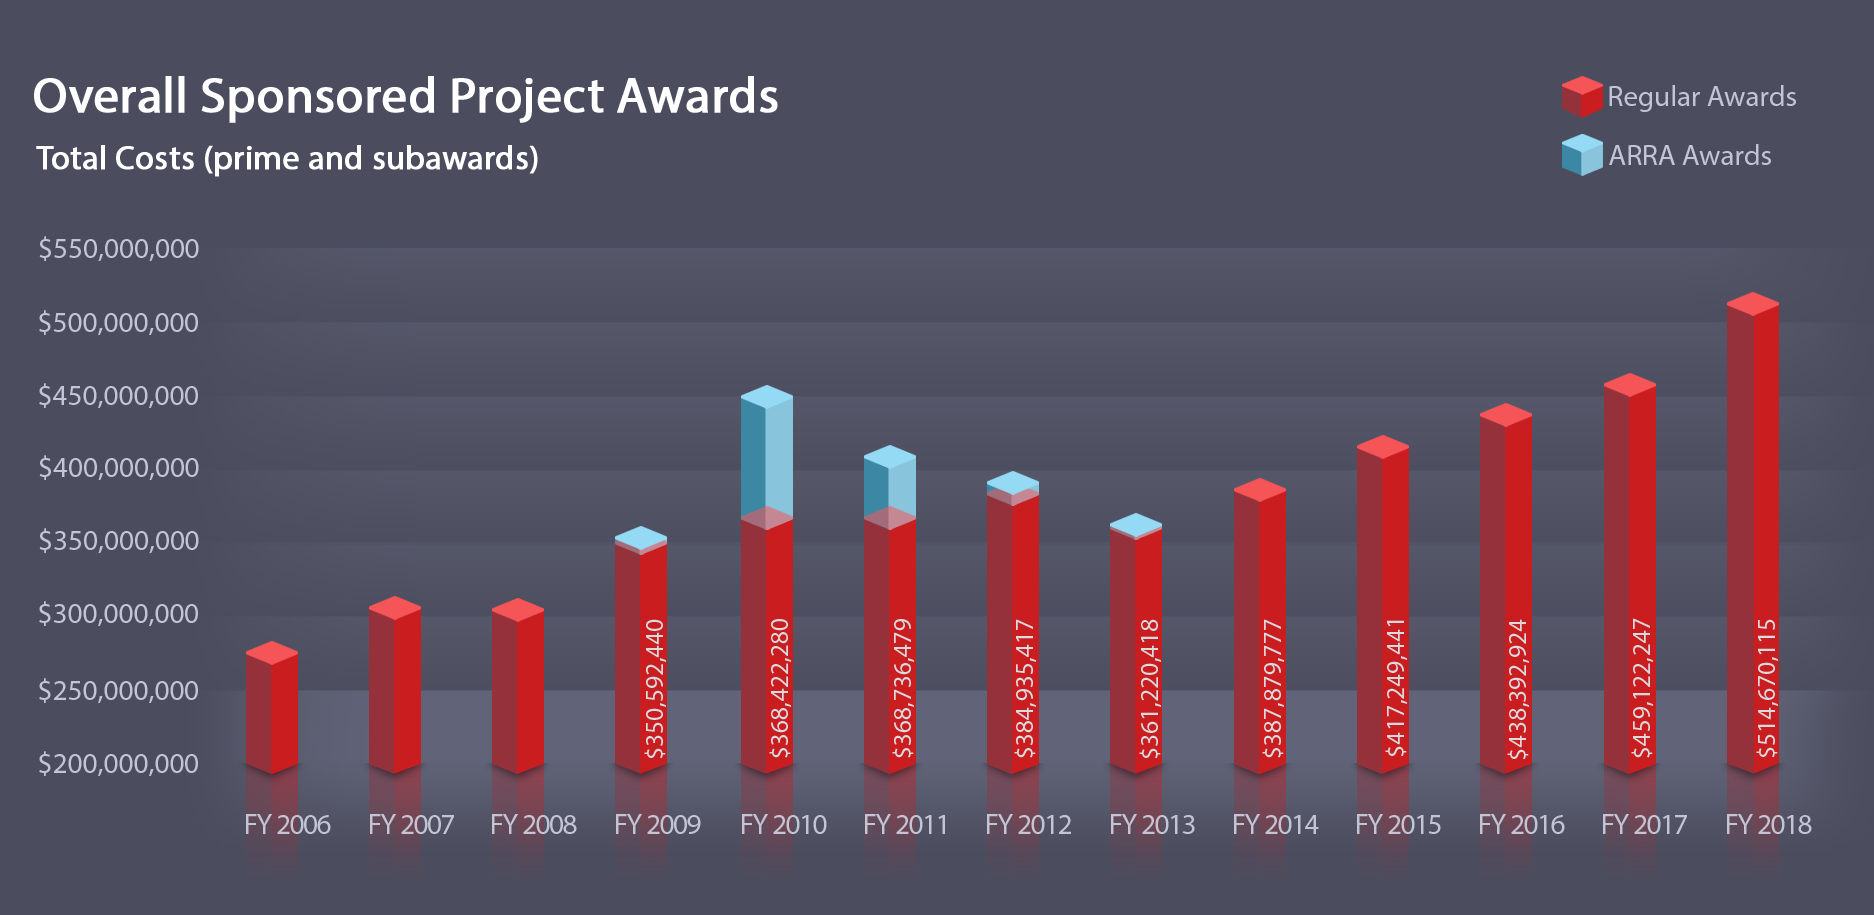 Overall Sponsored Project Awards